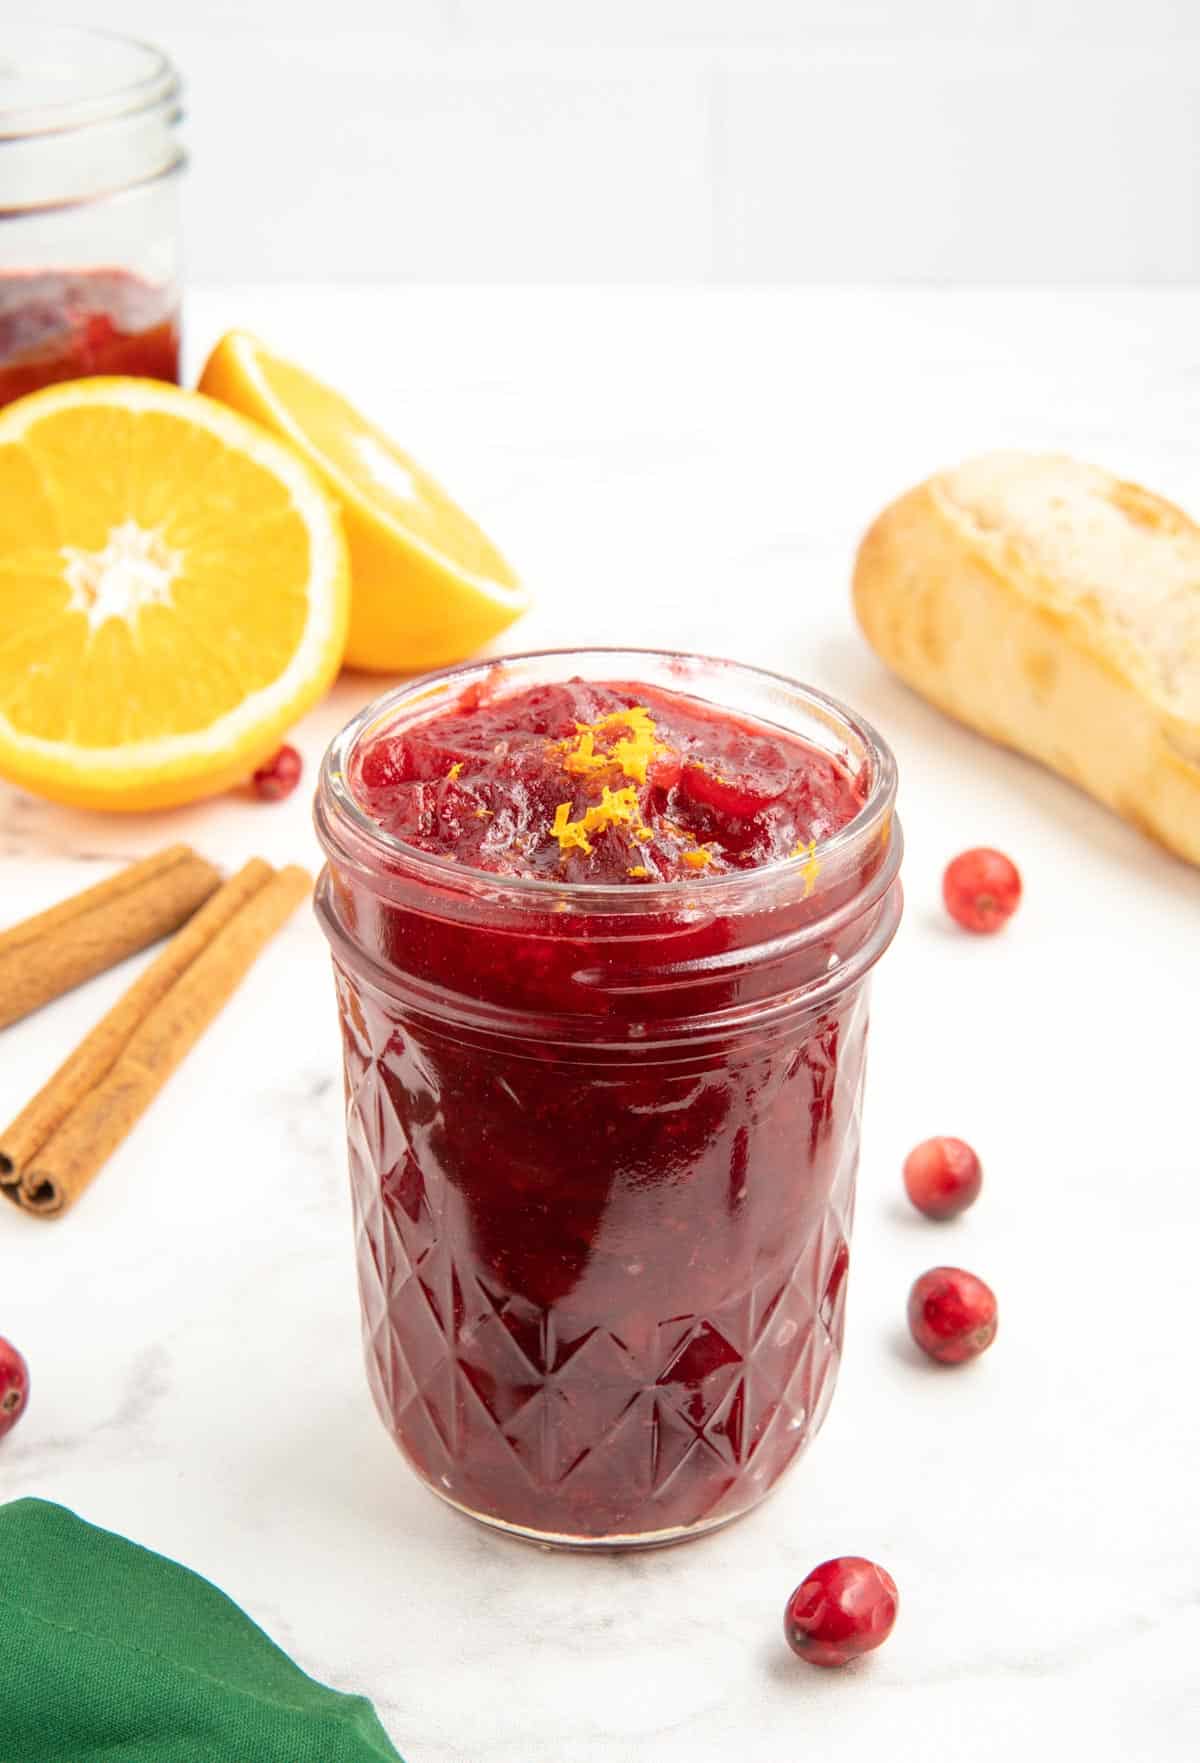 Cranberry sauce made with orange juice in a glass jar with cranberries scattered around.